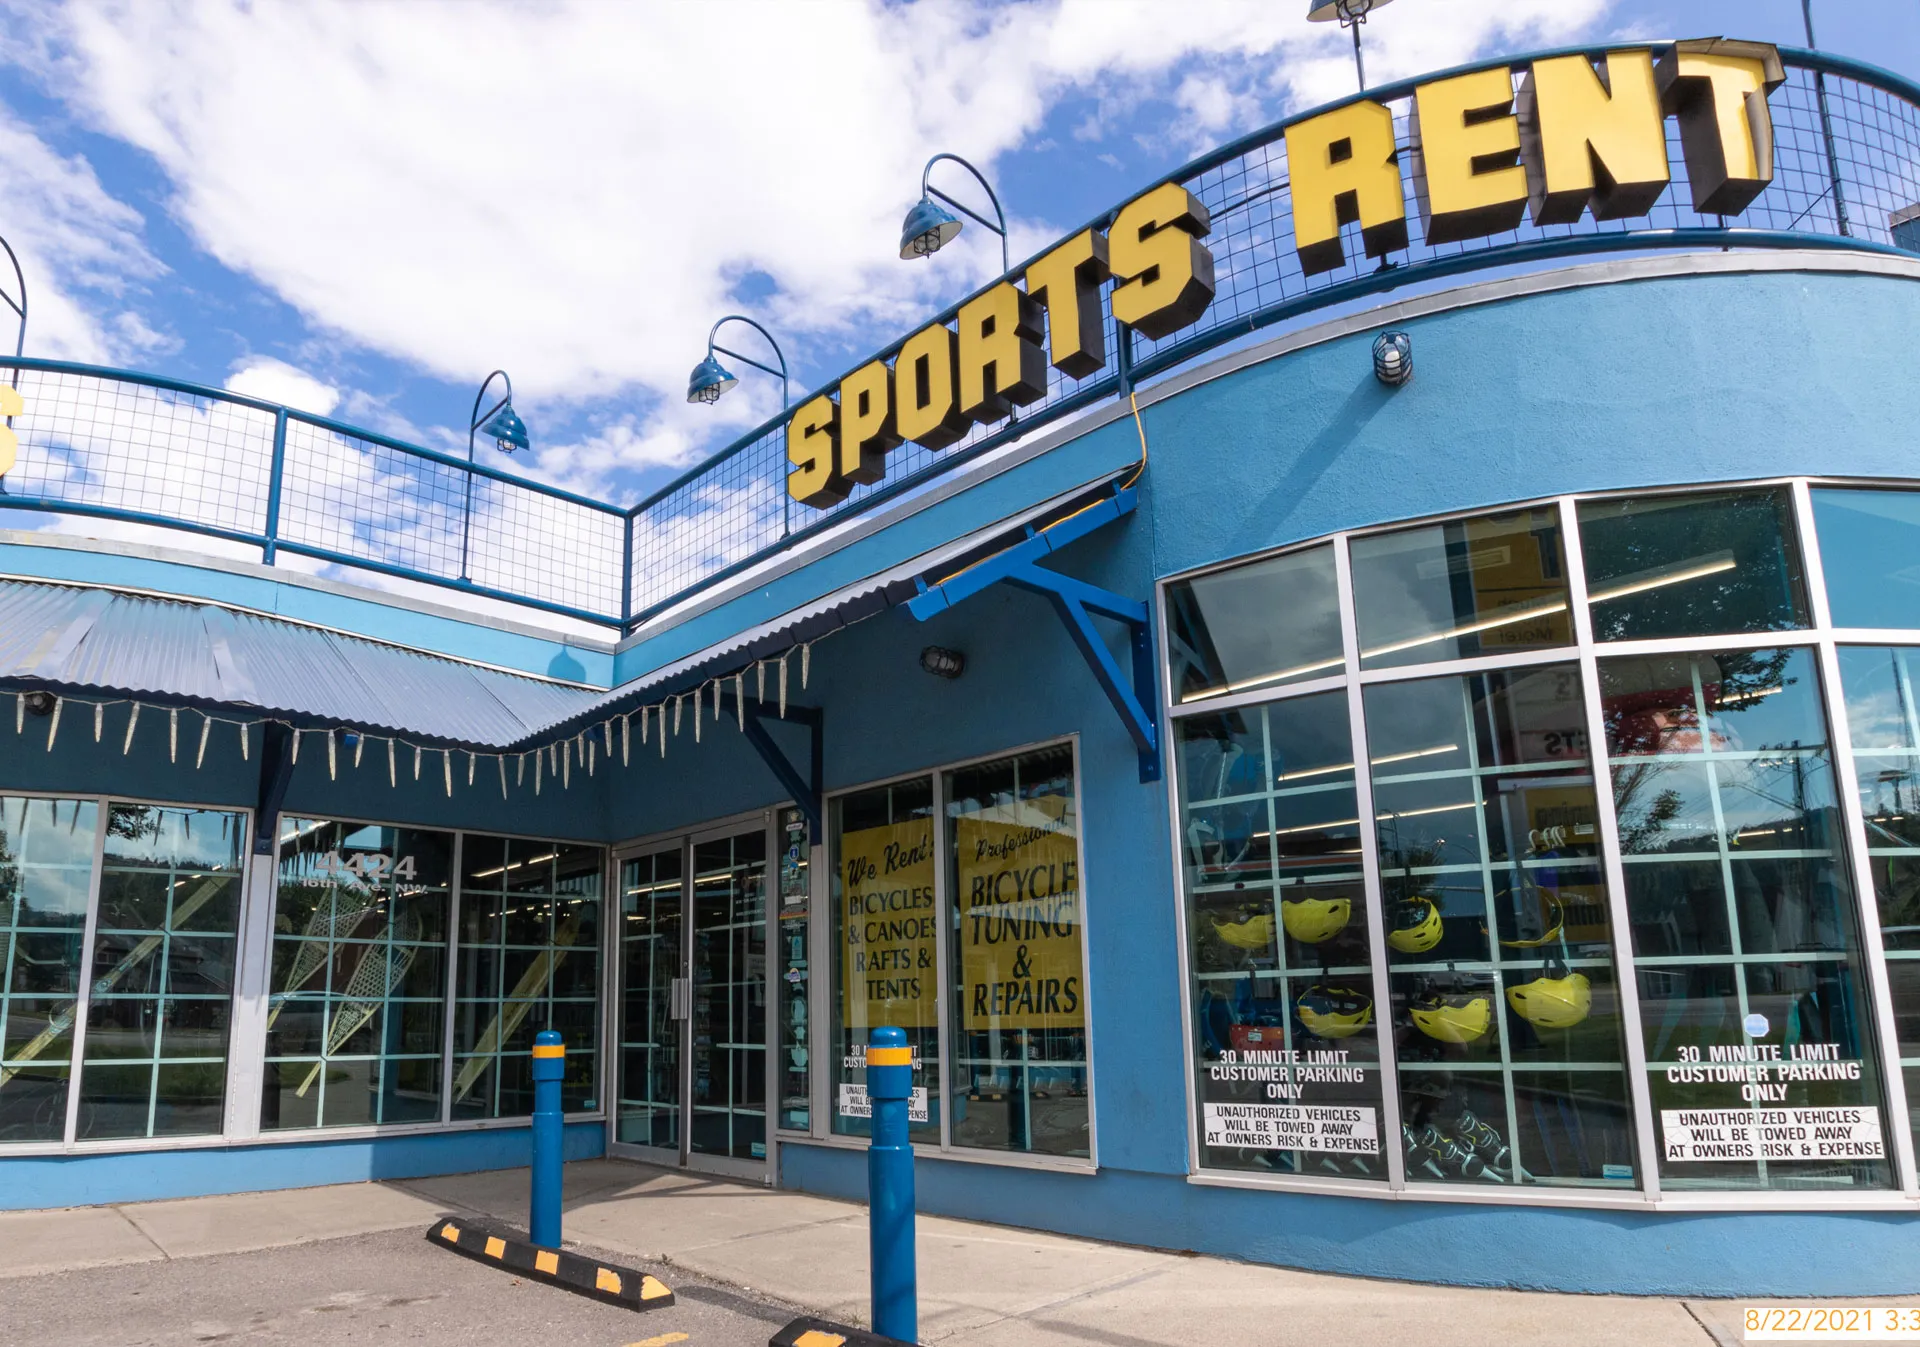 Sports Rent in Montgomery.